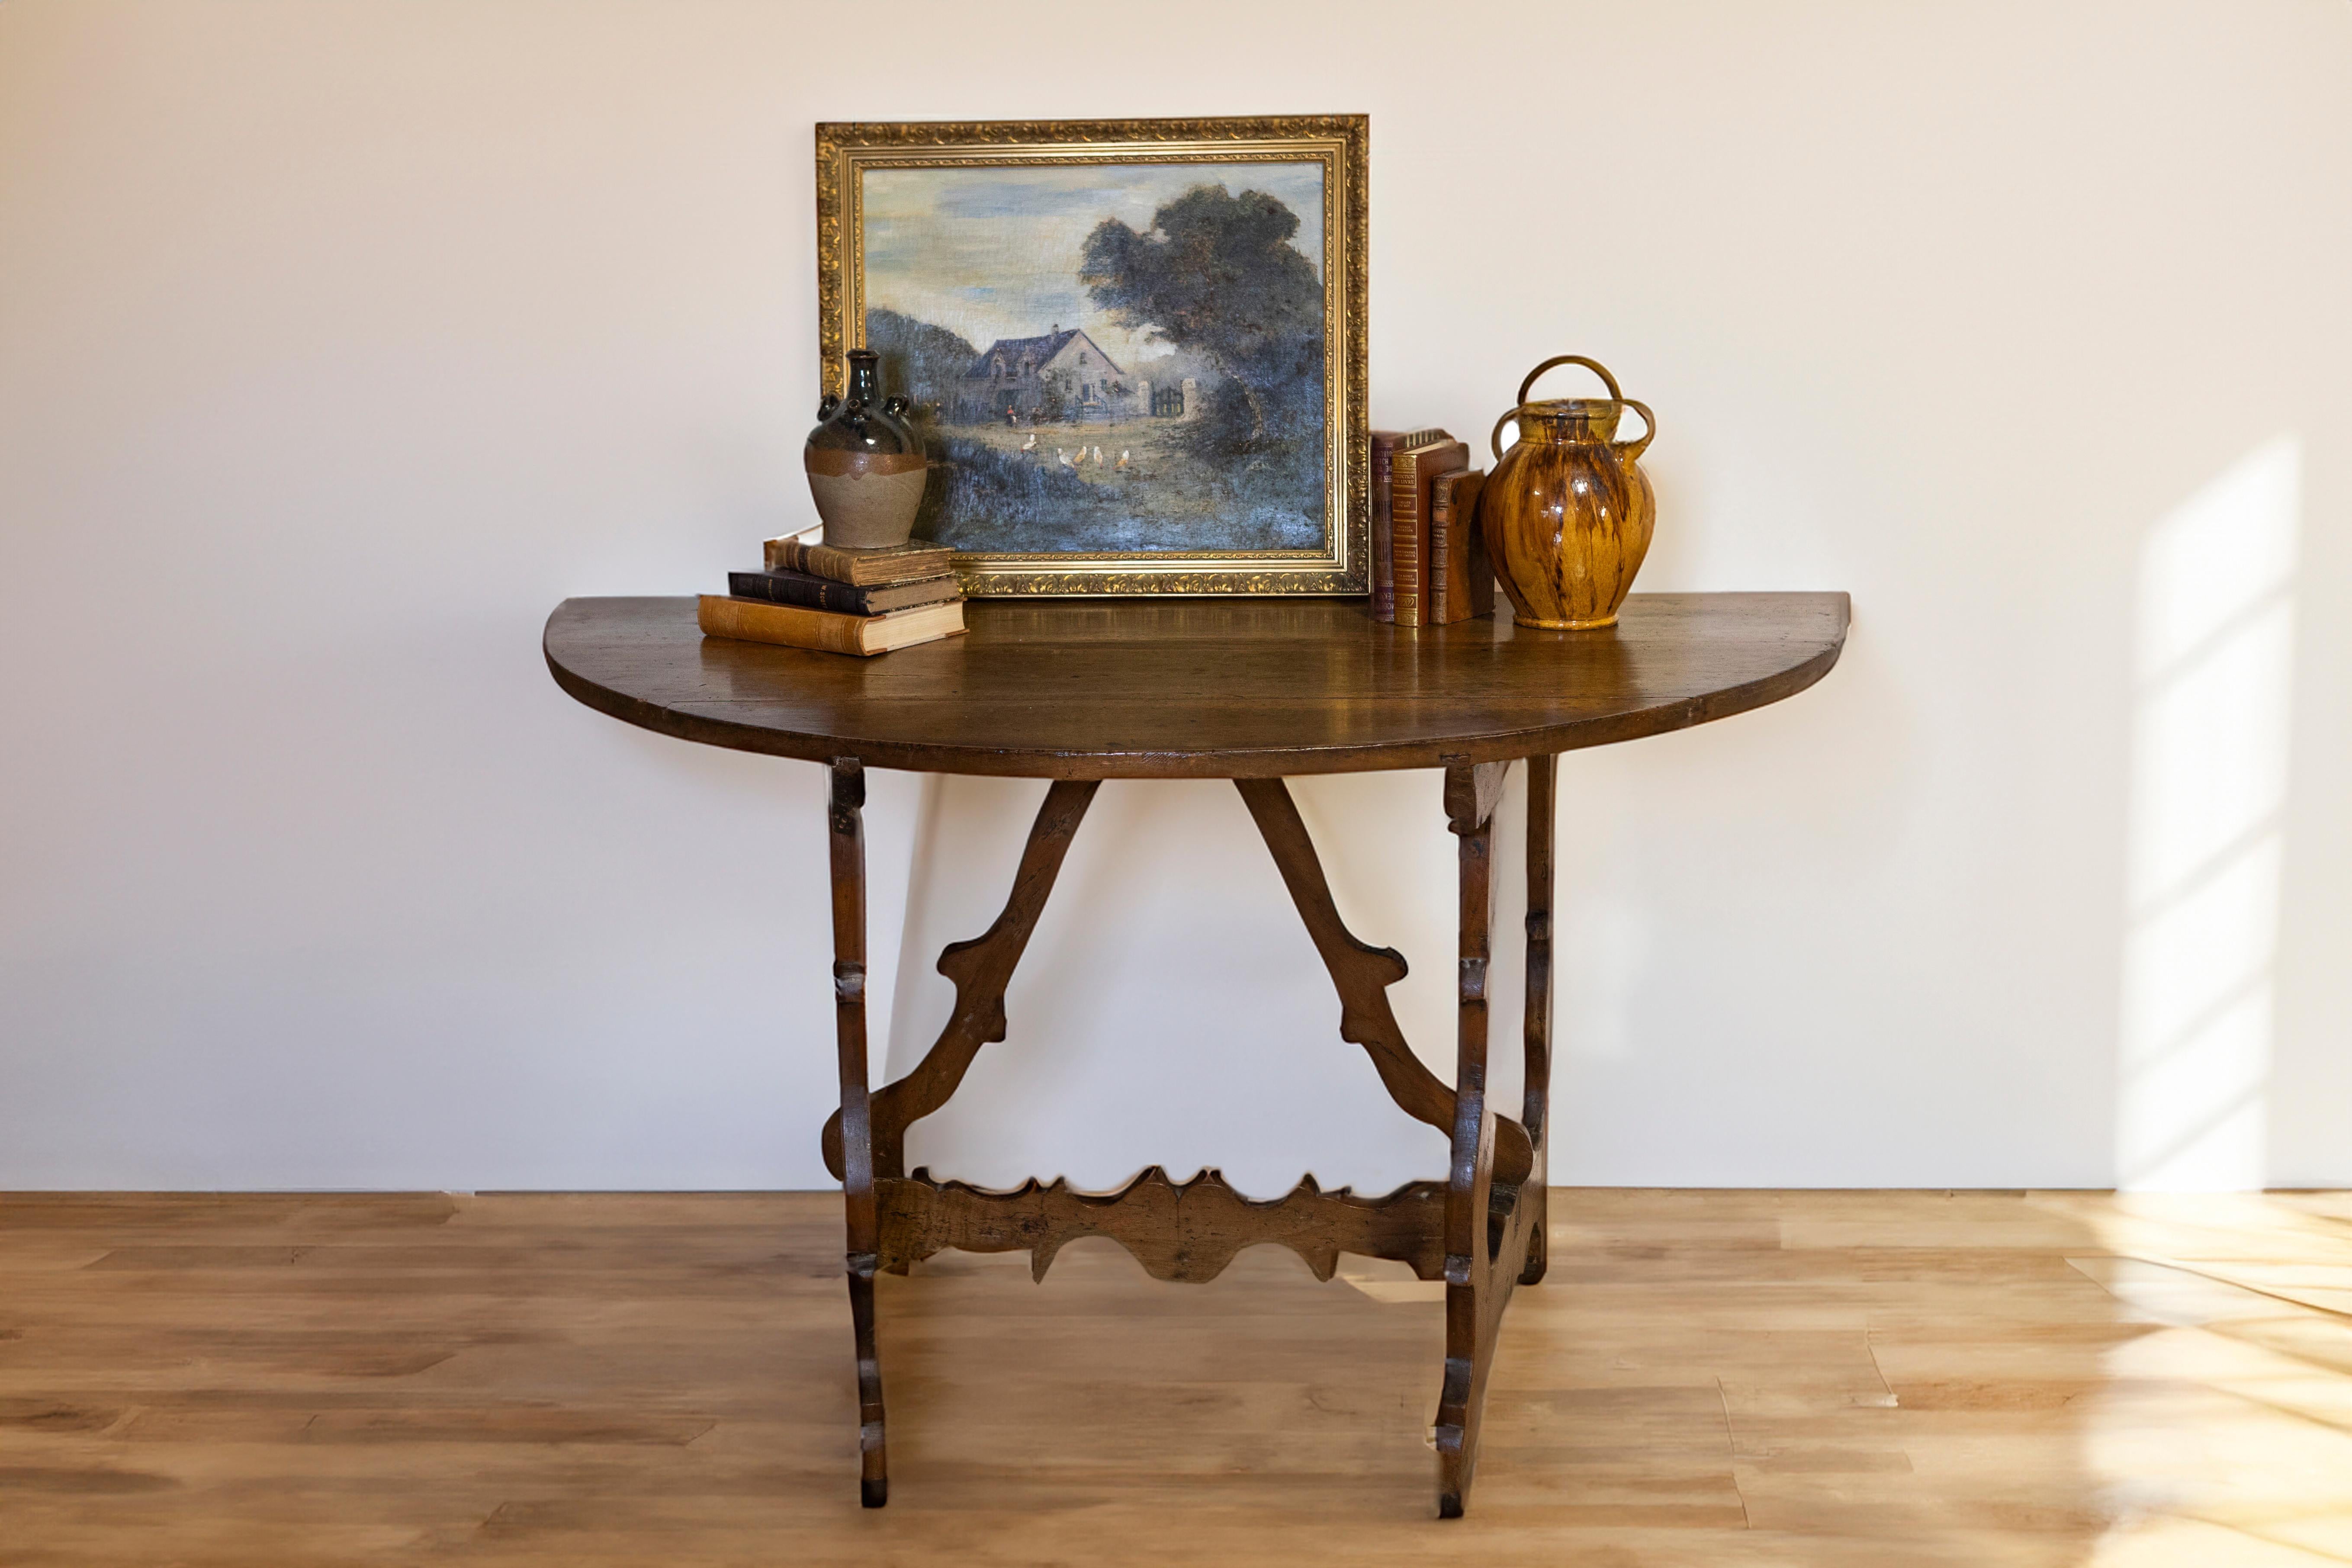 17th Century Italian Baroque Period Walnut Demilune Table with Carved Lyre Base For Sale 1